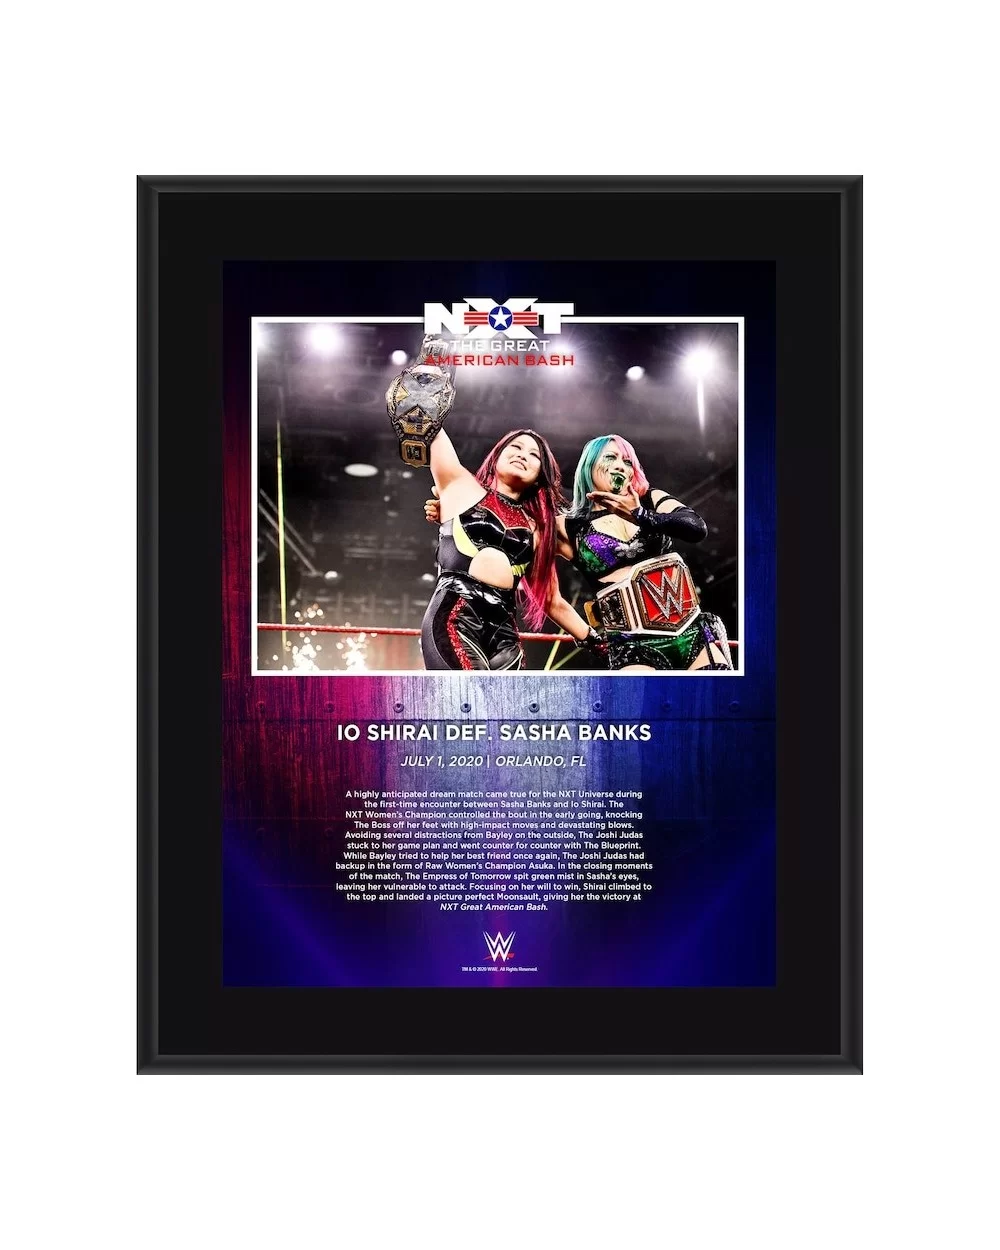 Io Shirai WWE Framed 10.5" x 13" NXT TakeOver: Great American Bash Sublimated Collage $12.00 Home & Office